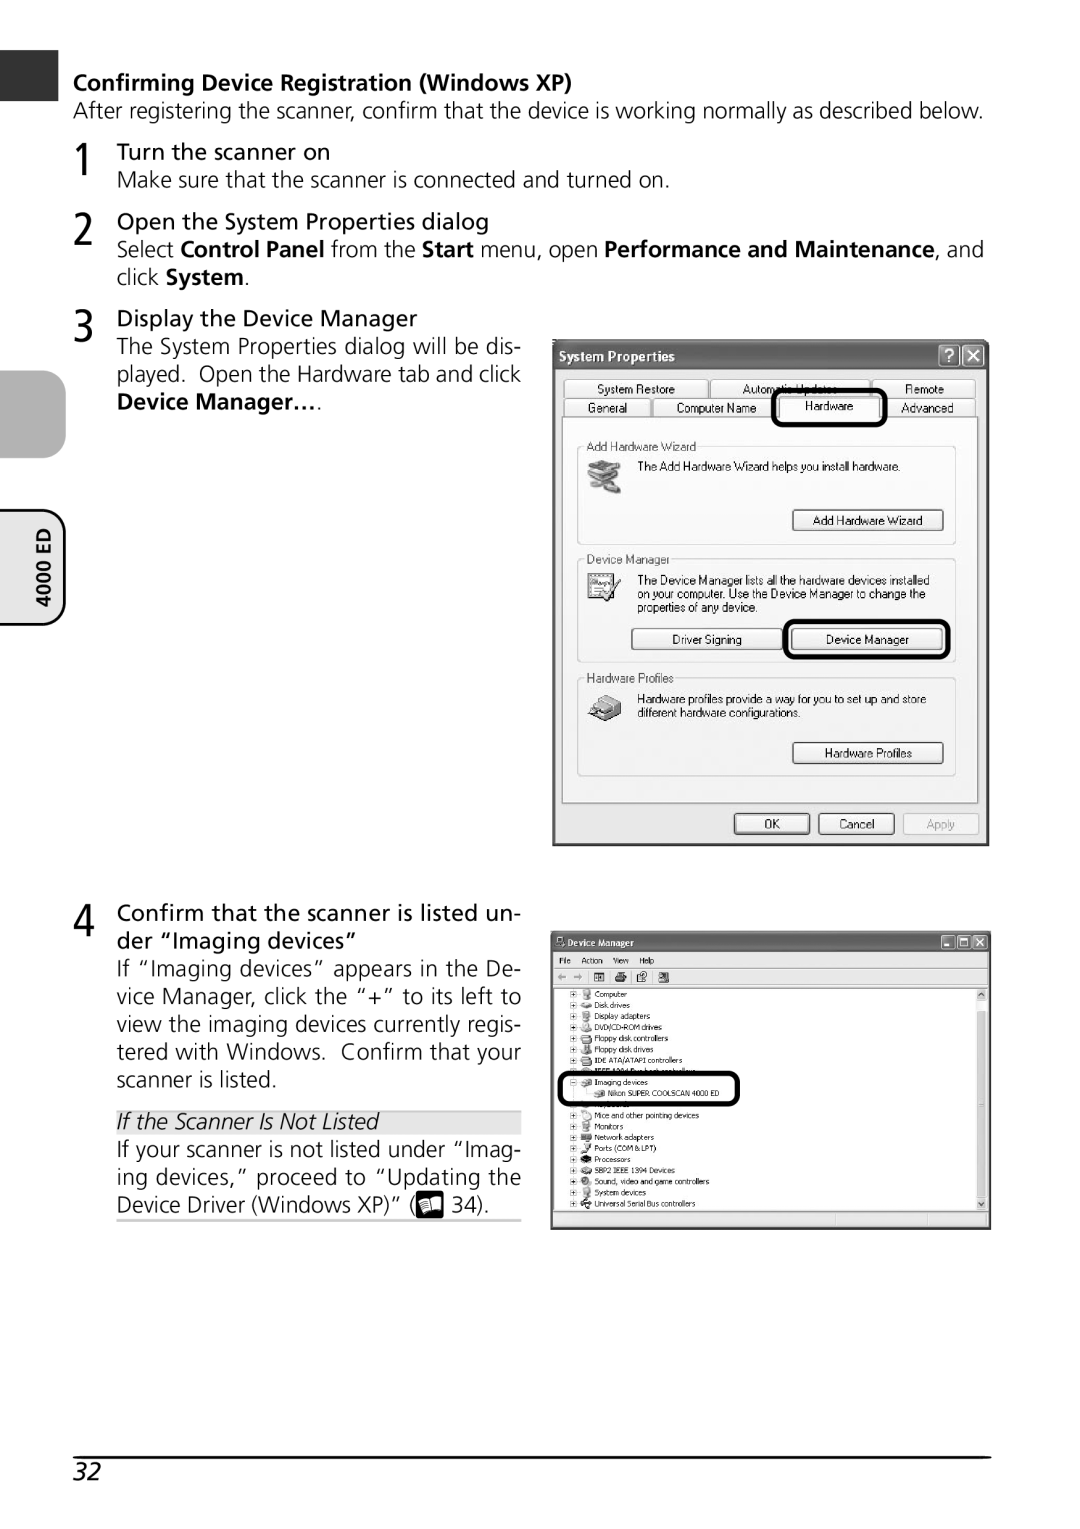 Nikon LS4000 user manual Confirming Device Registration Windows XP, If the Scanner Is Not Listed 